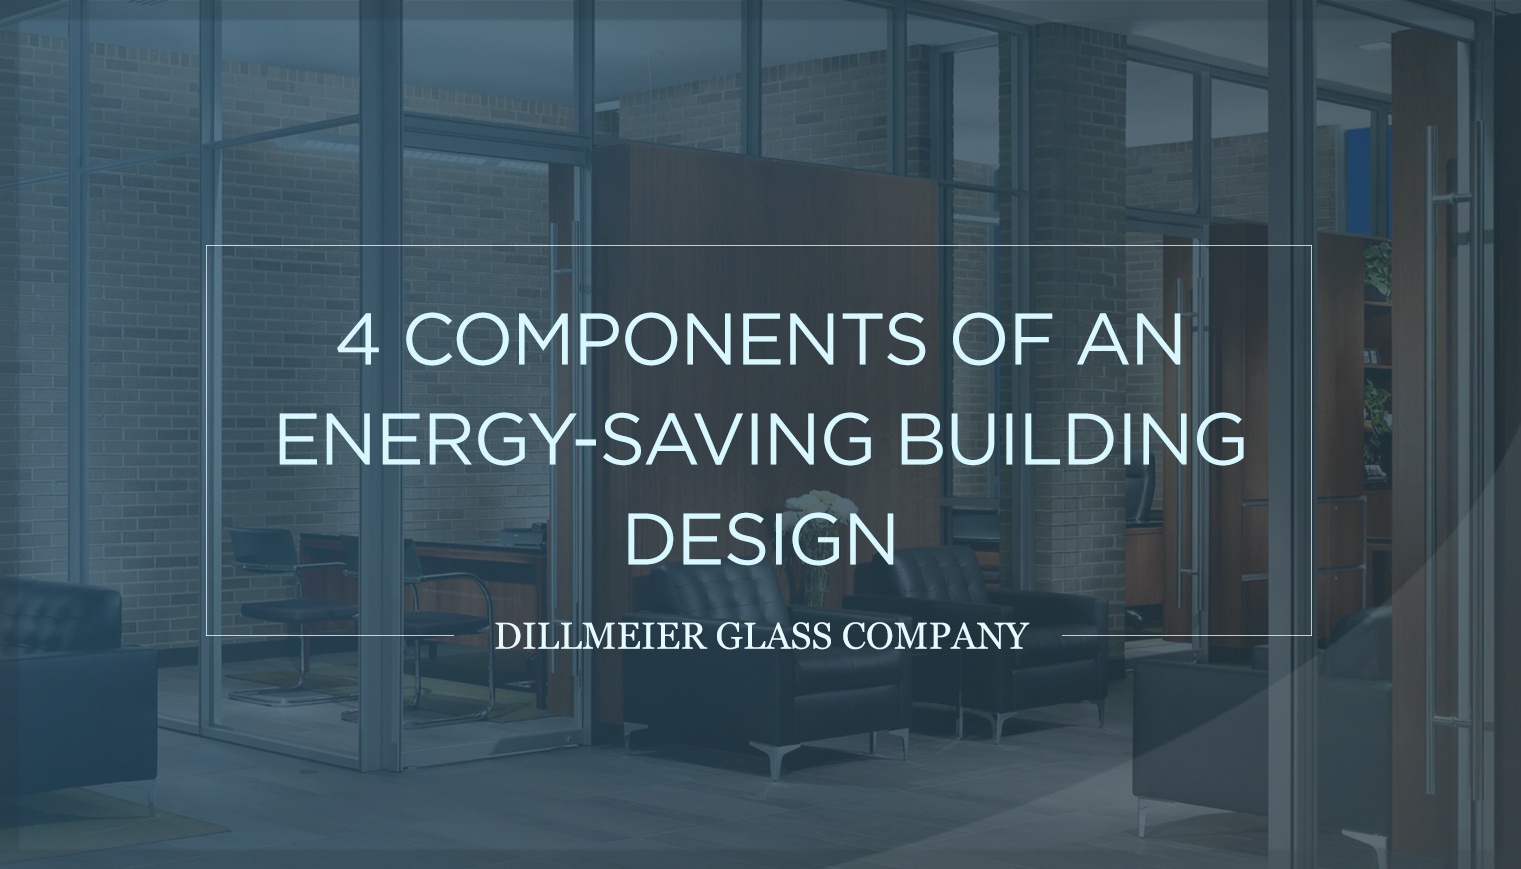 4 Components of an Energy-Saving Building Design